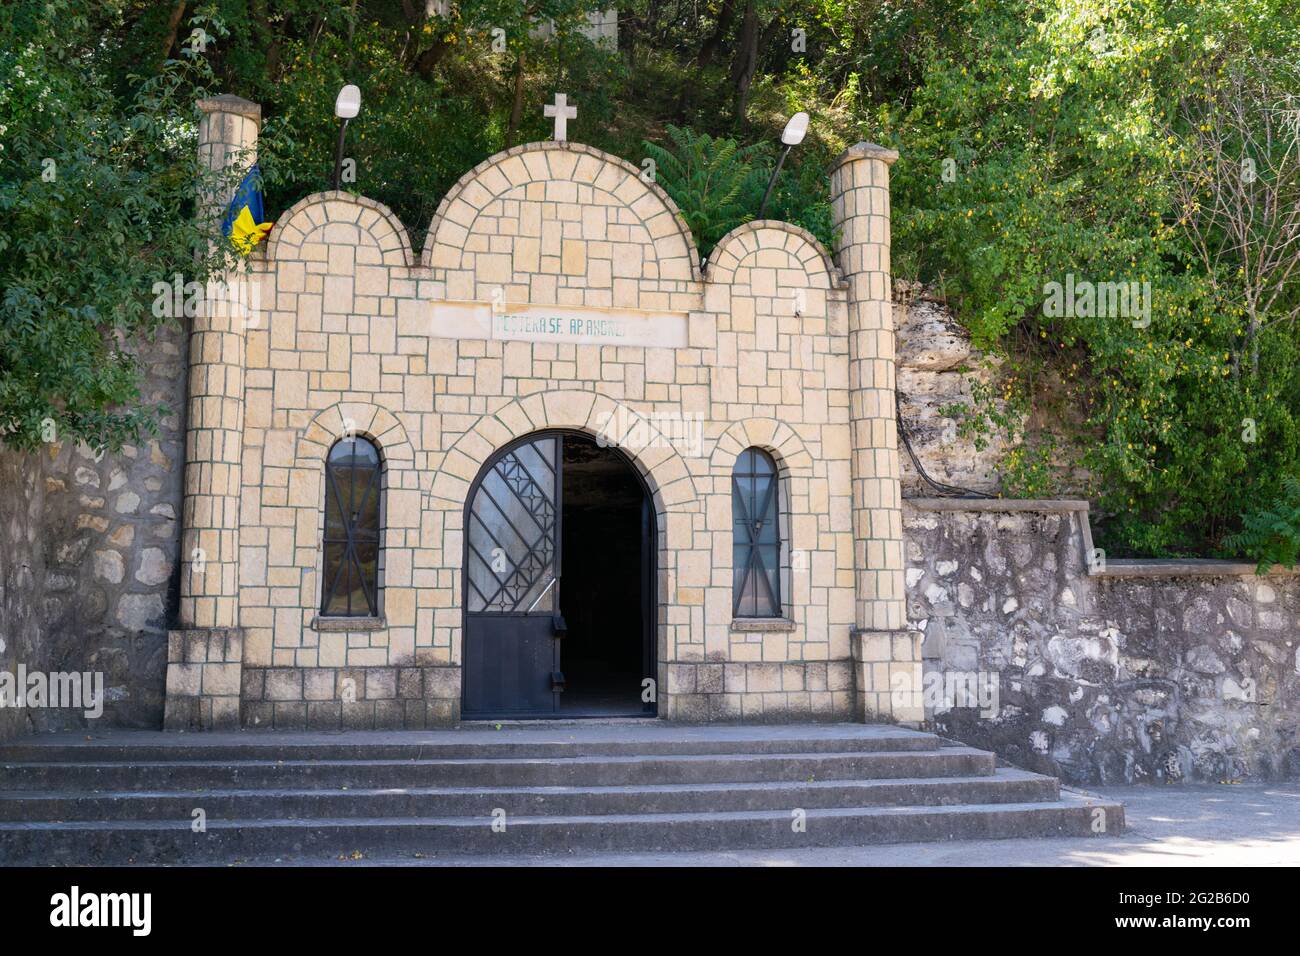 Constanta, Romania - August 04, 2020: The entrance to the Cave of Saint Andrew in Dobrogea, Romania. Stock Photo